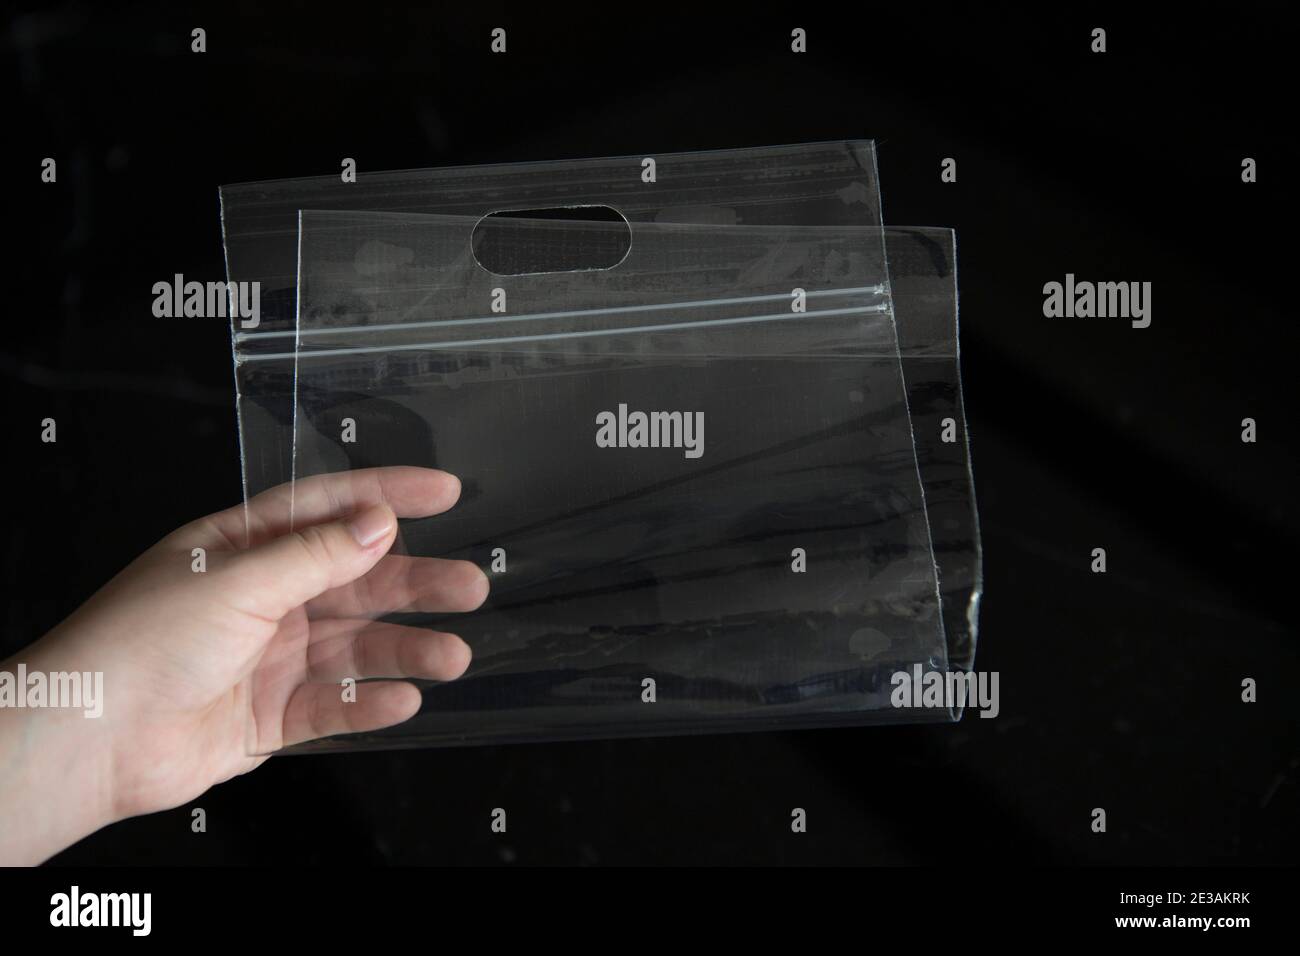 The zipper plastic bag is picked up to show transparency on a black background. Stock Photo